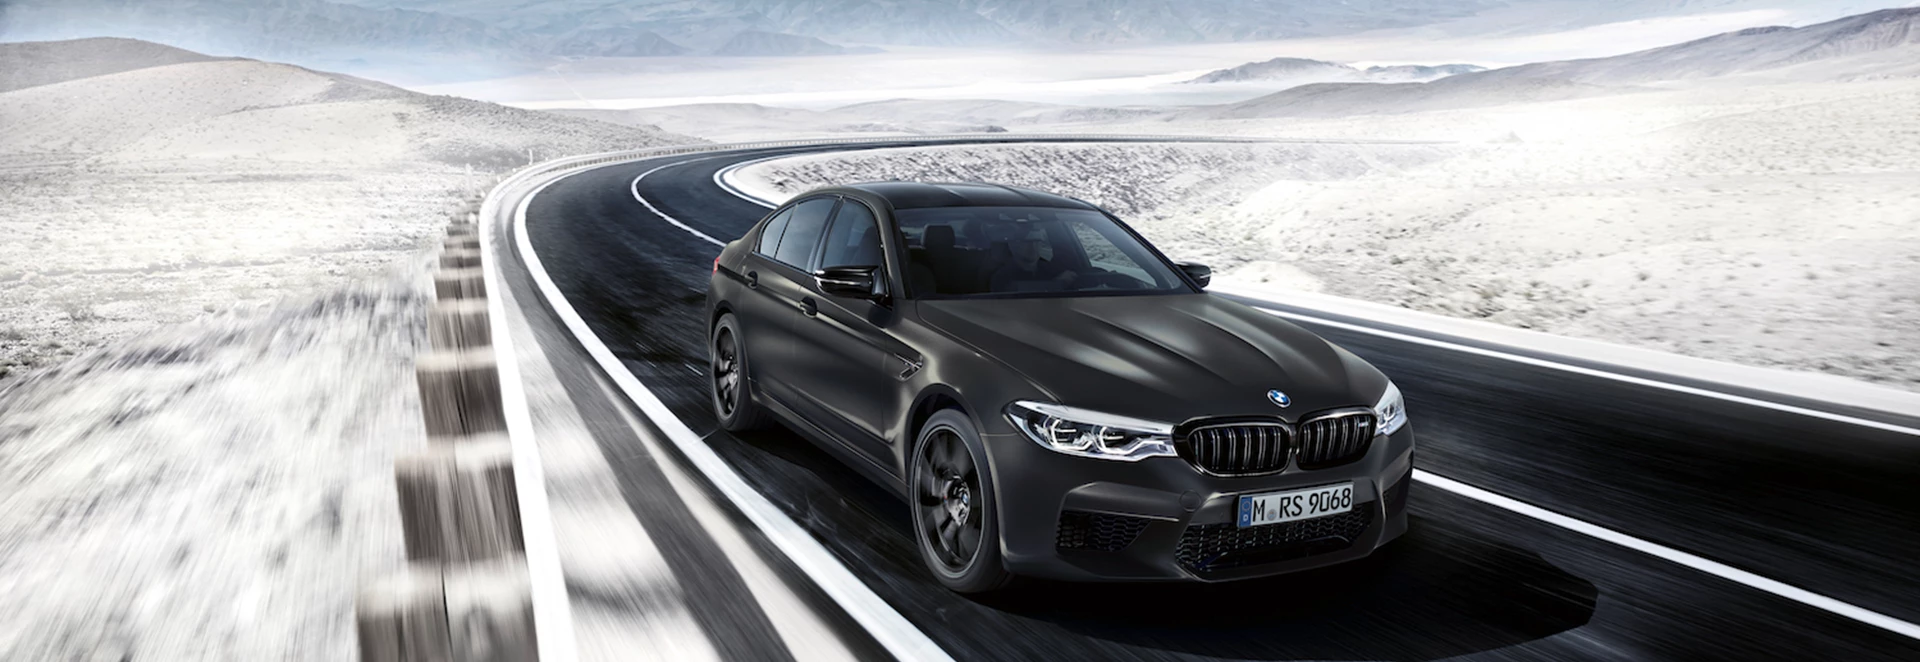 BMW takes covers off 35th anniversary edition M5